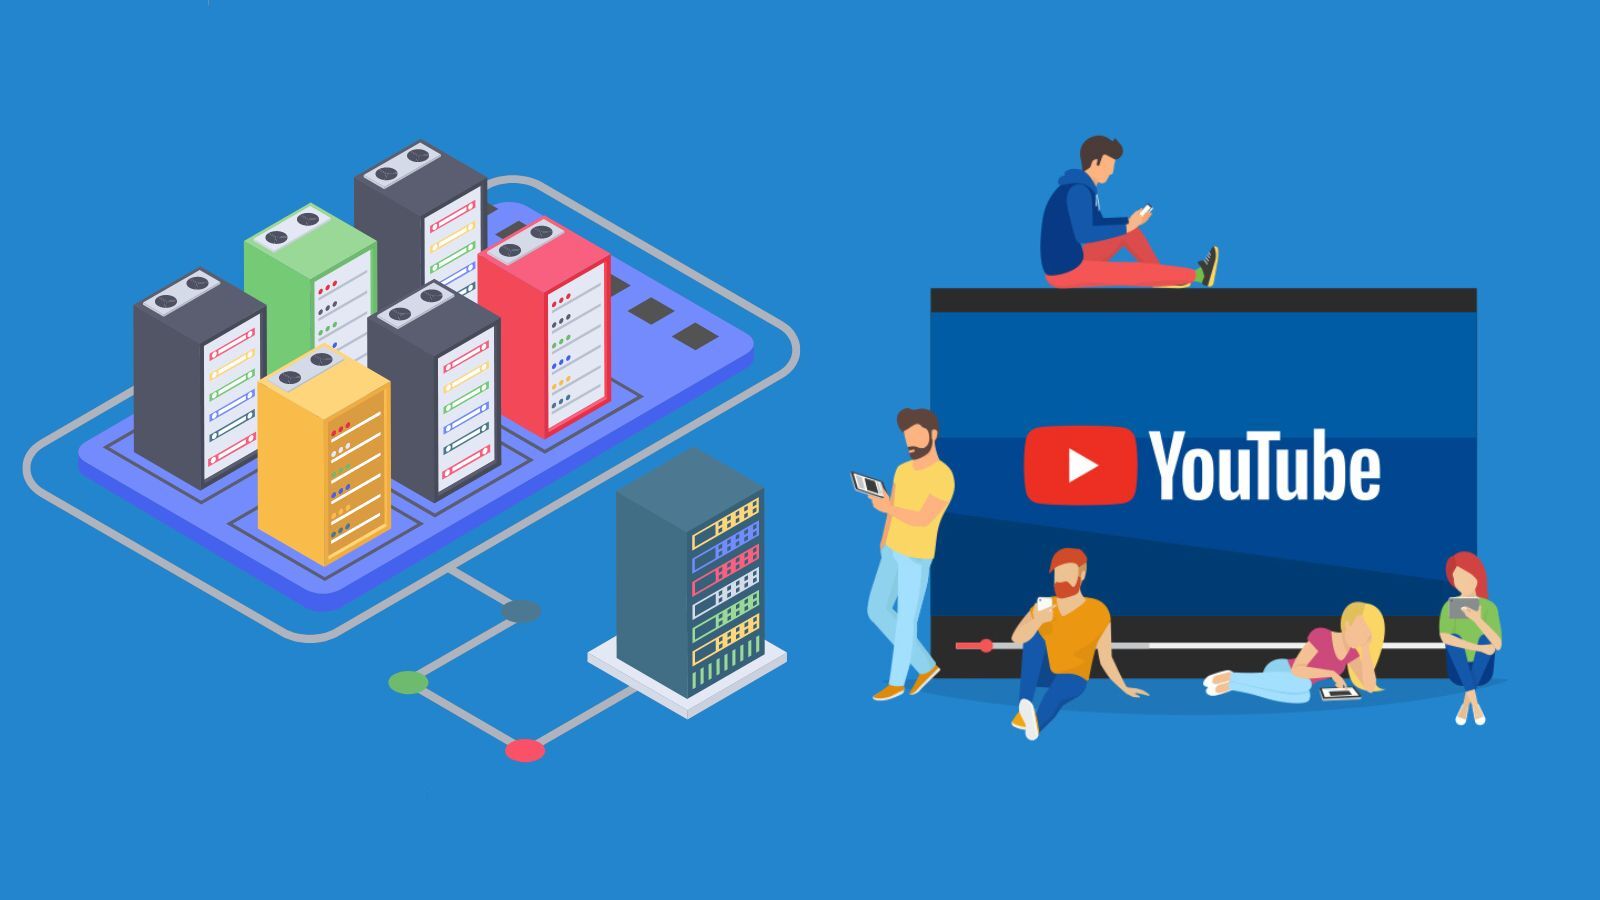 6 Fast Residential Proxies for YouTube Web Scraping (2023 Guide)